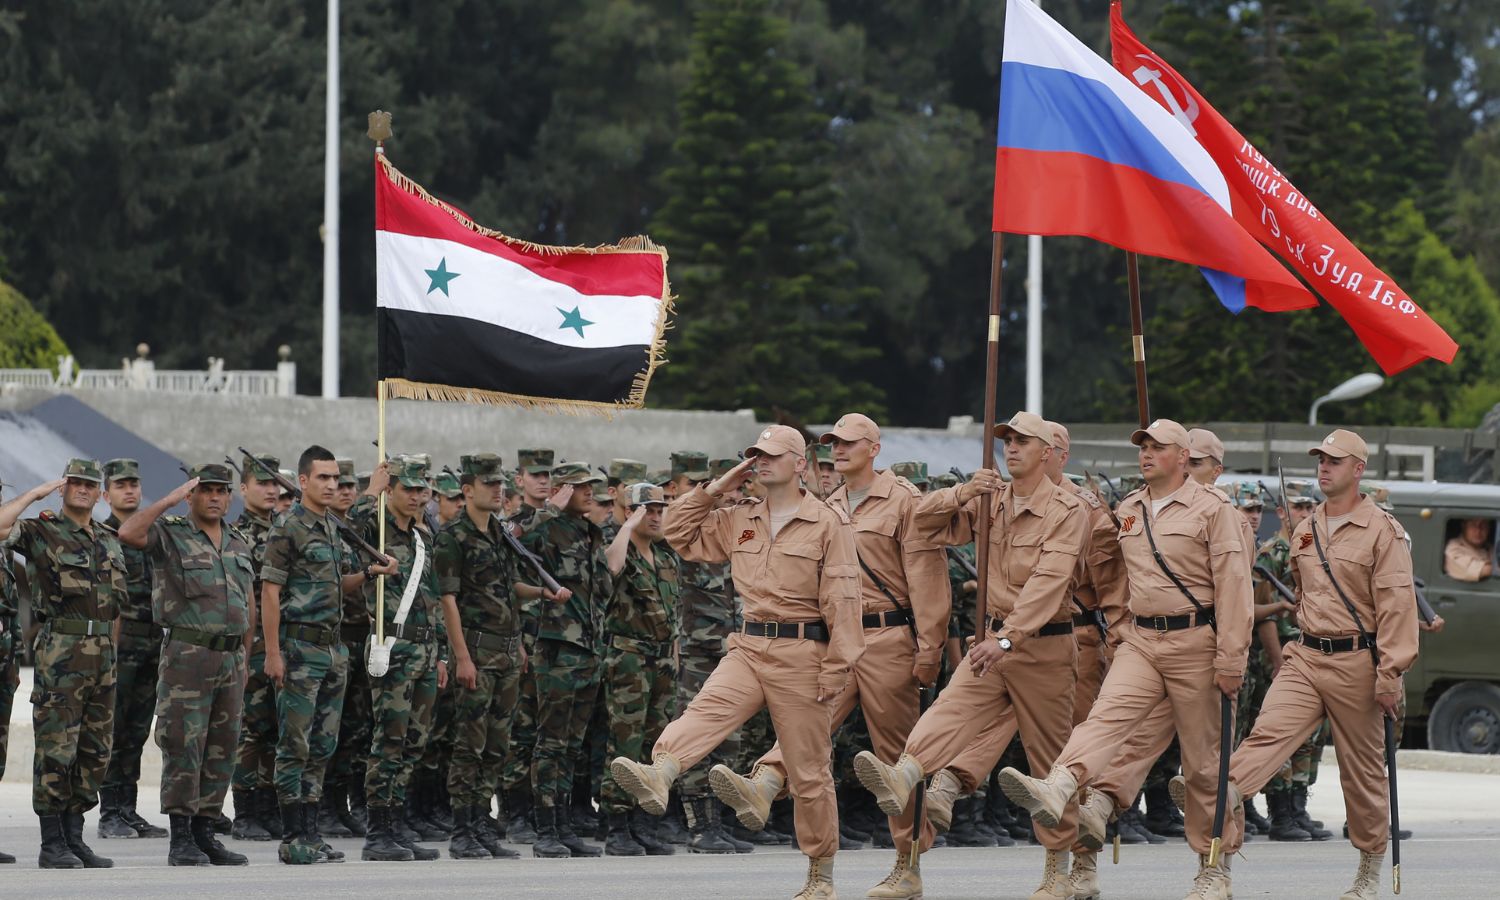 A Russian military parade at the Hmeimim base in Syria (Sputnik agency)